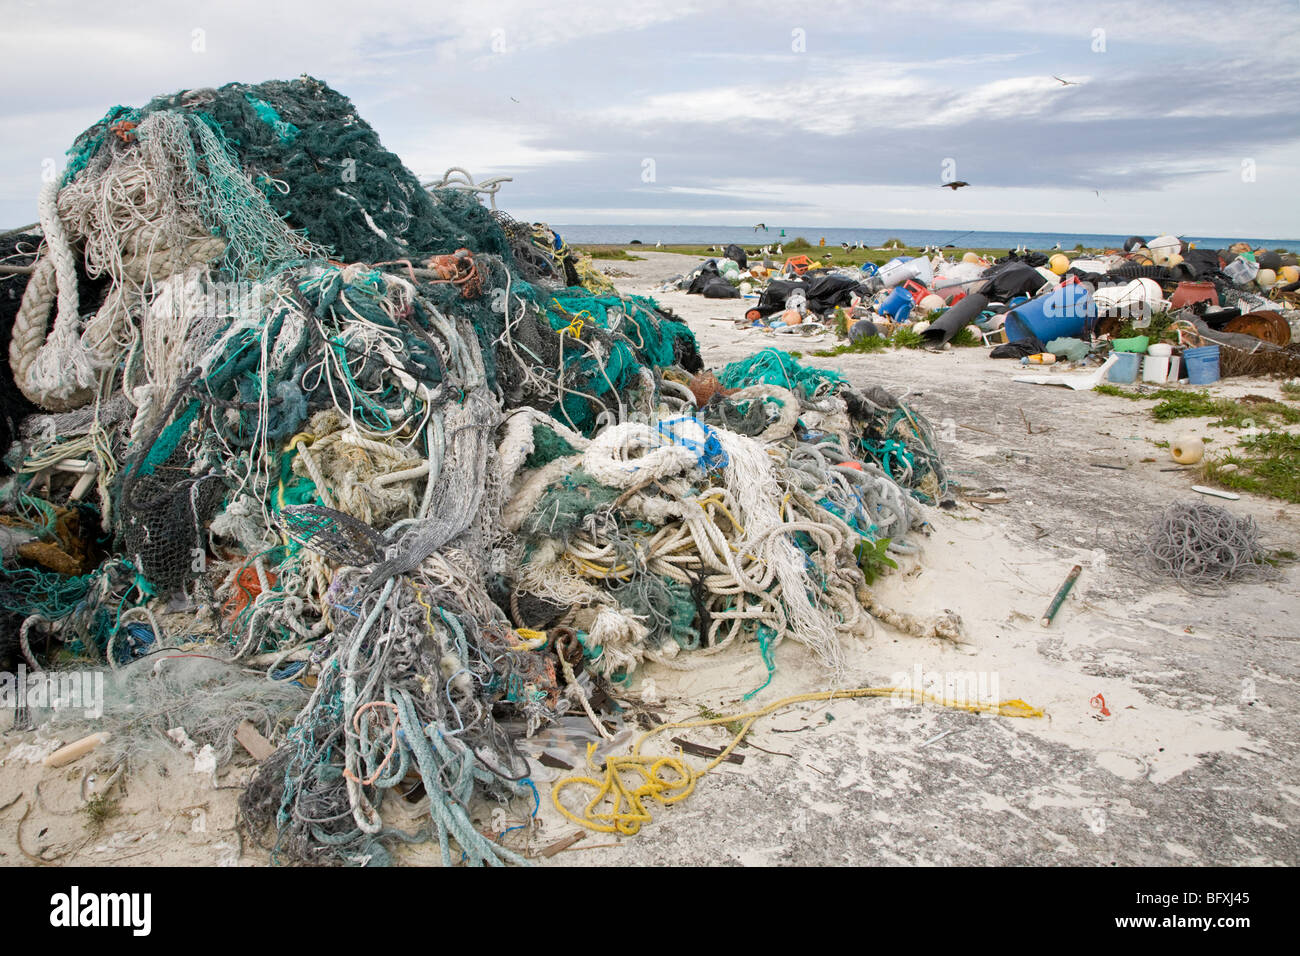 Abandoned fishing nets, ropes and other marine debris washed ashore by ocean currents, collected to be shipped off island for recycling or disposal Stock Photo